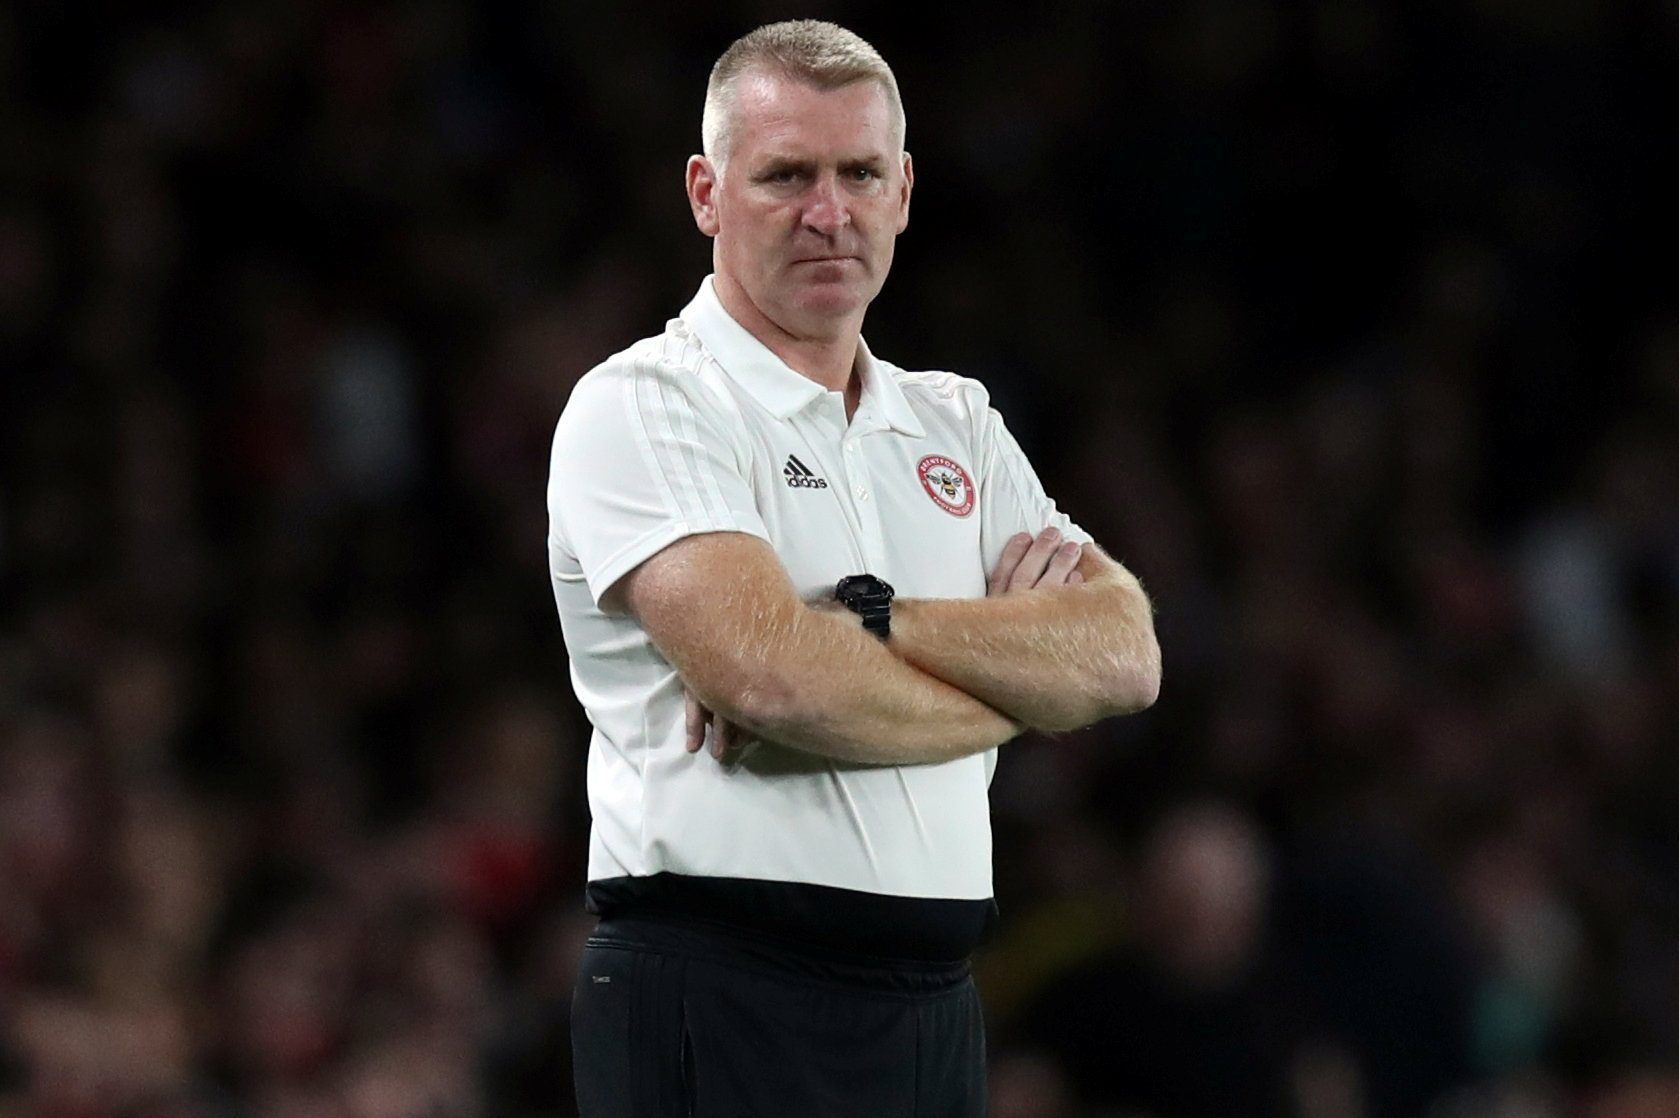 Soccer Football - Carabao Cup - Third Round - Arsenal v Brentford - Emirates Stadium, London, Britain - September 26, 2018  Brentford manager Dean Smith looks on       Action Images via Reuters/Peter Cziborra  EDITORIAL USE ONLY. No use with unauthorized audio, video, data, fixture lists, club/league logos or 